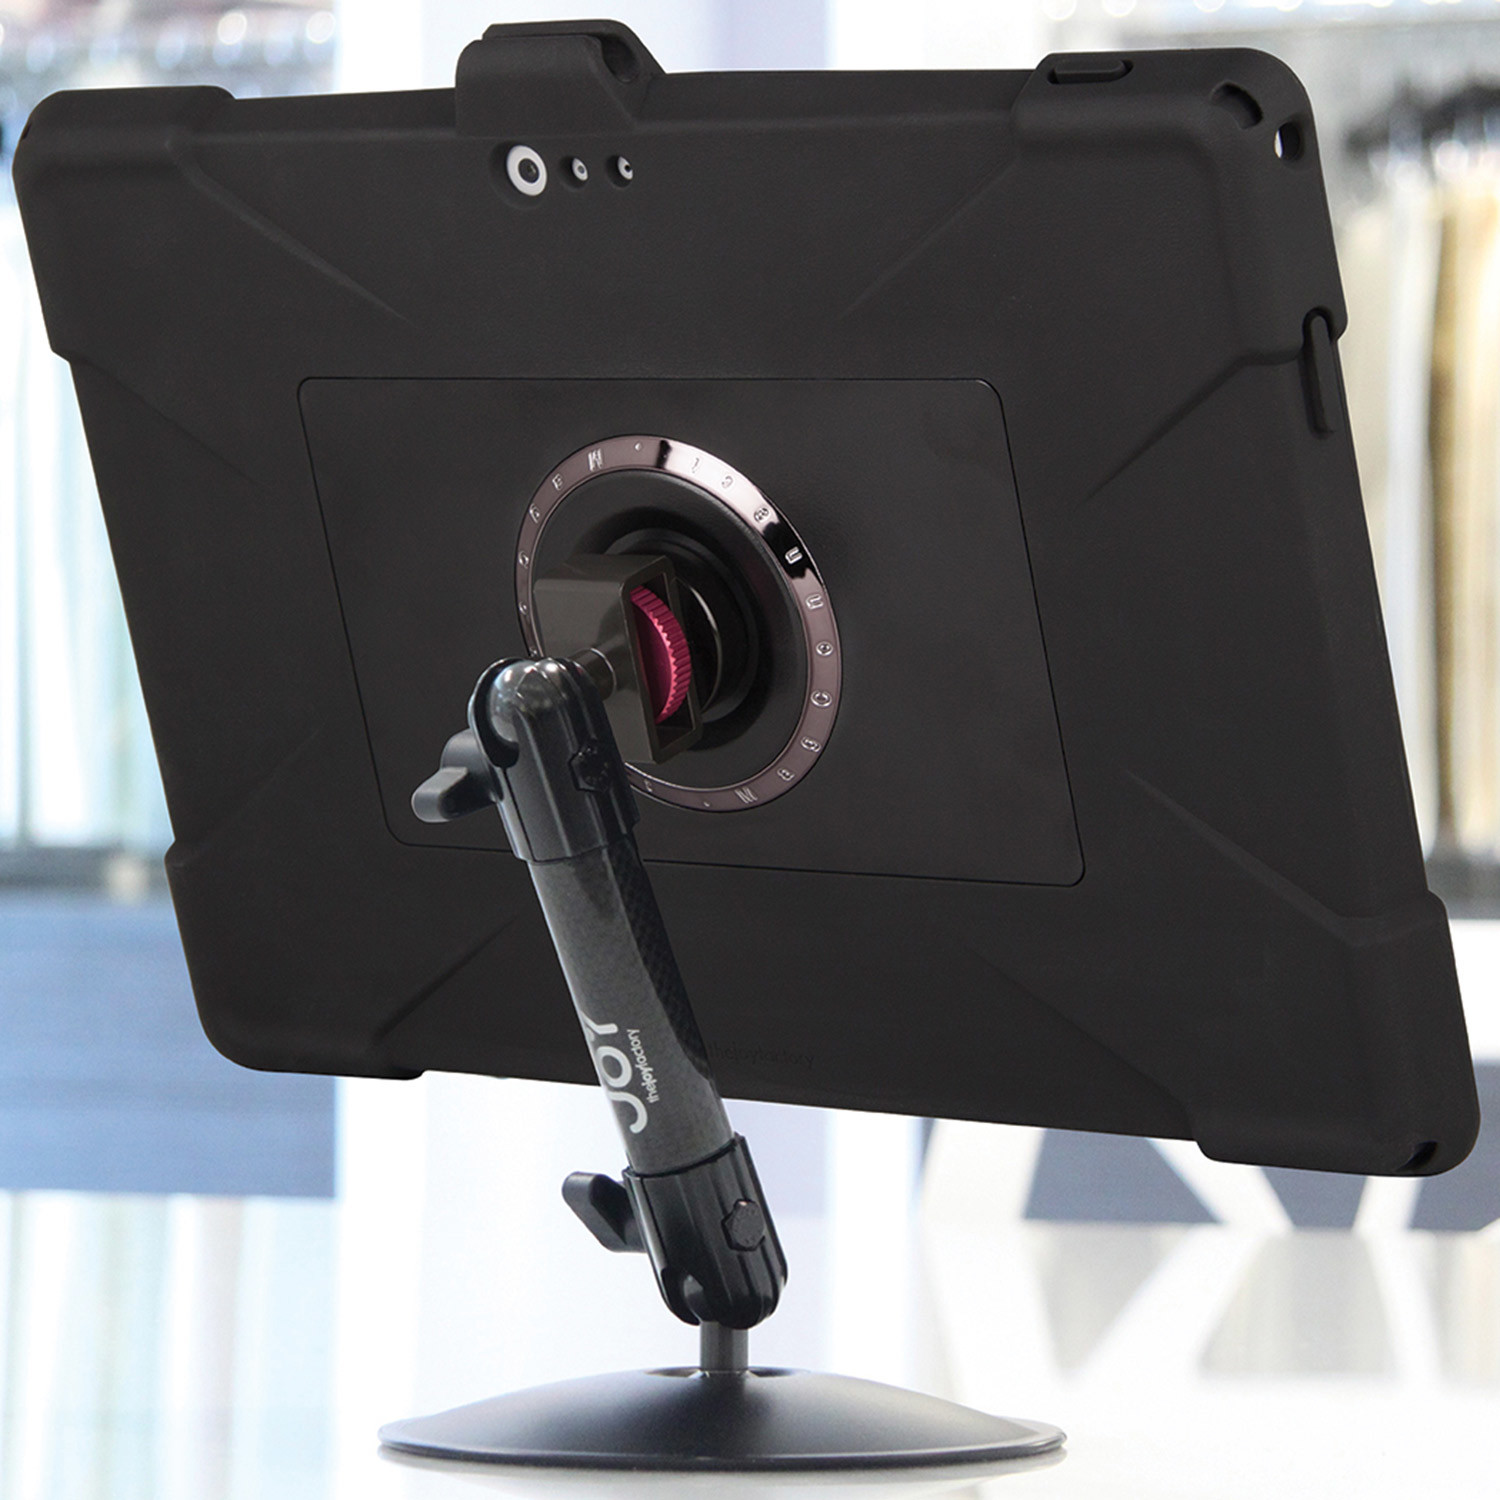 Edge M // Surface Pro 3 Desk Stand Mount - The Joy Factory - Touch of ...